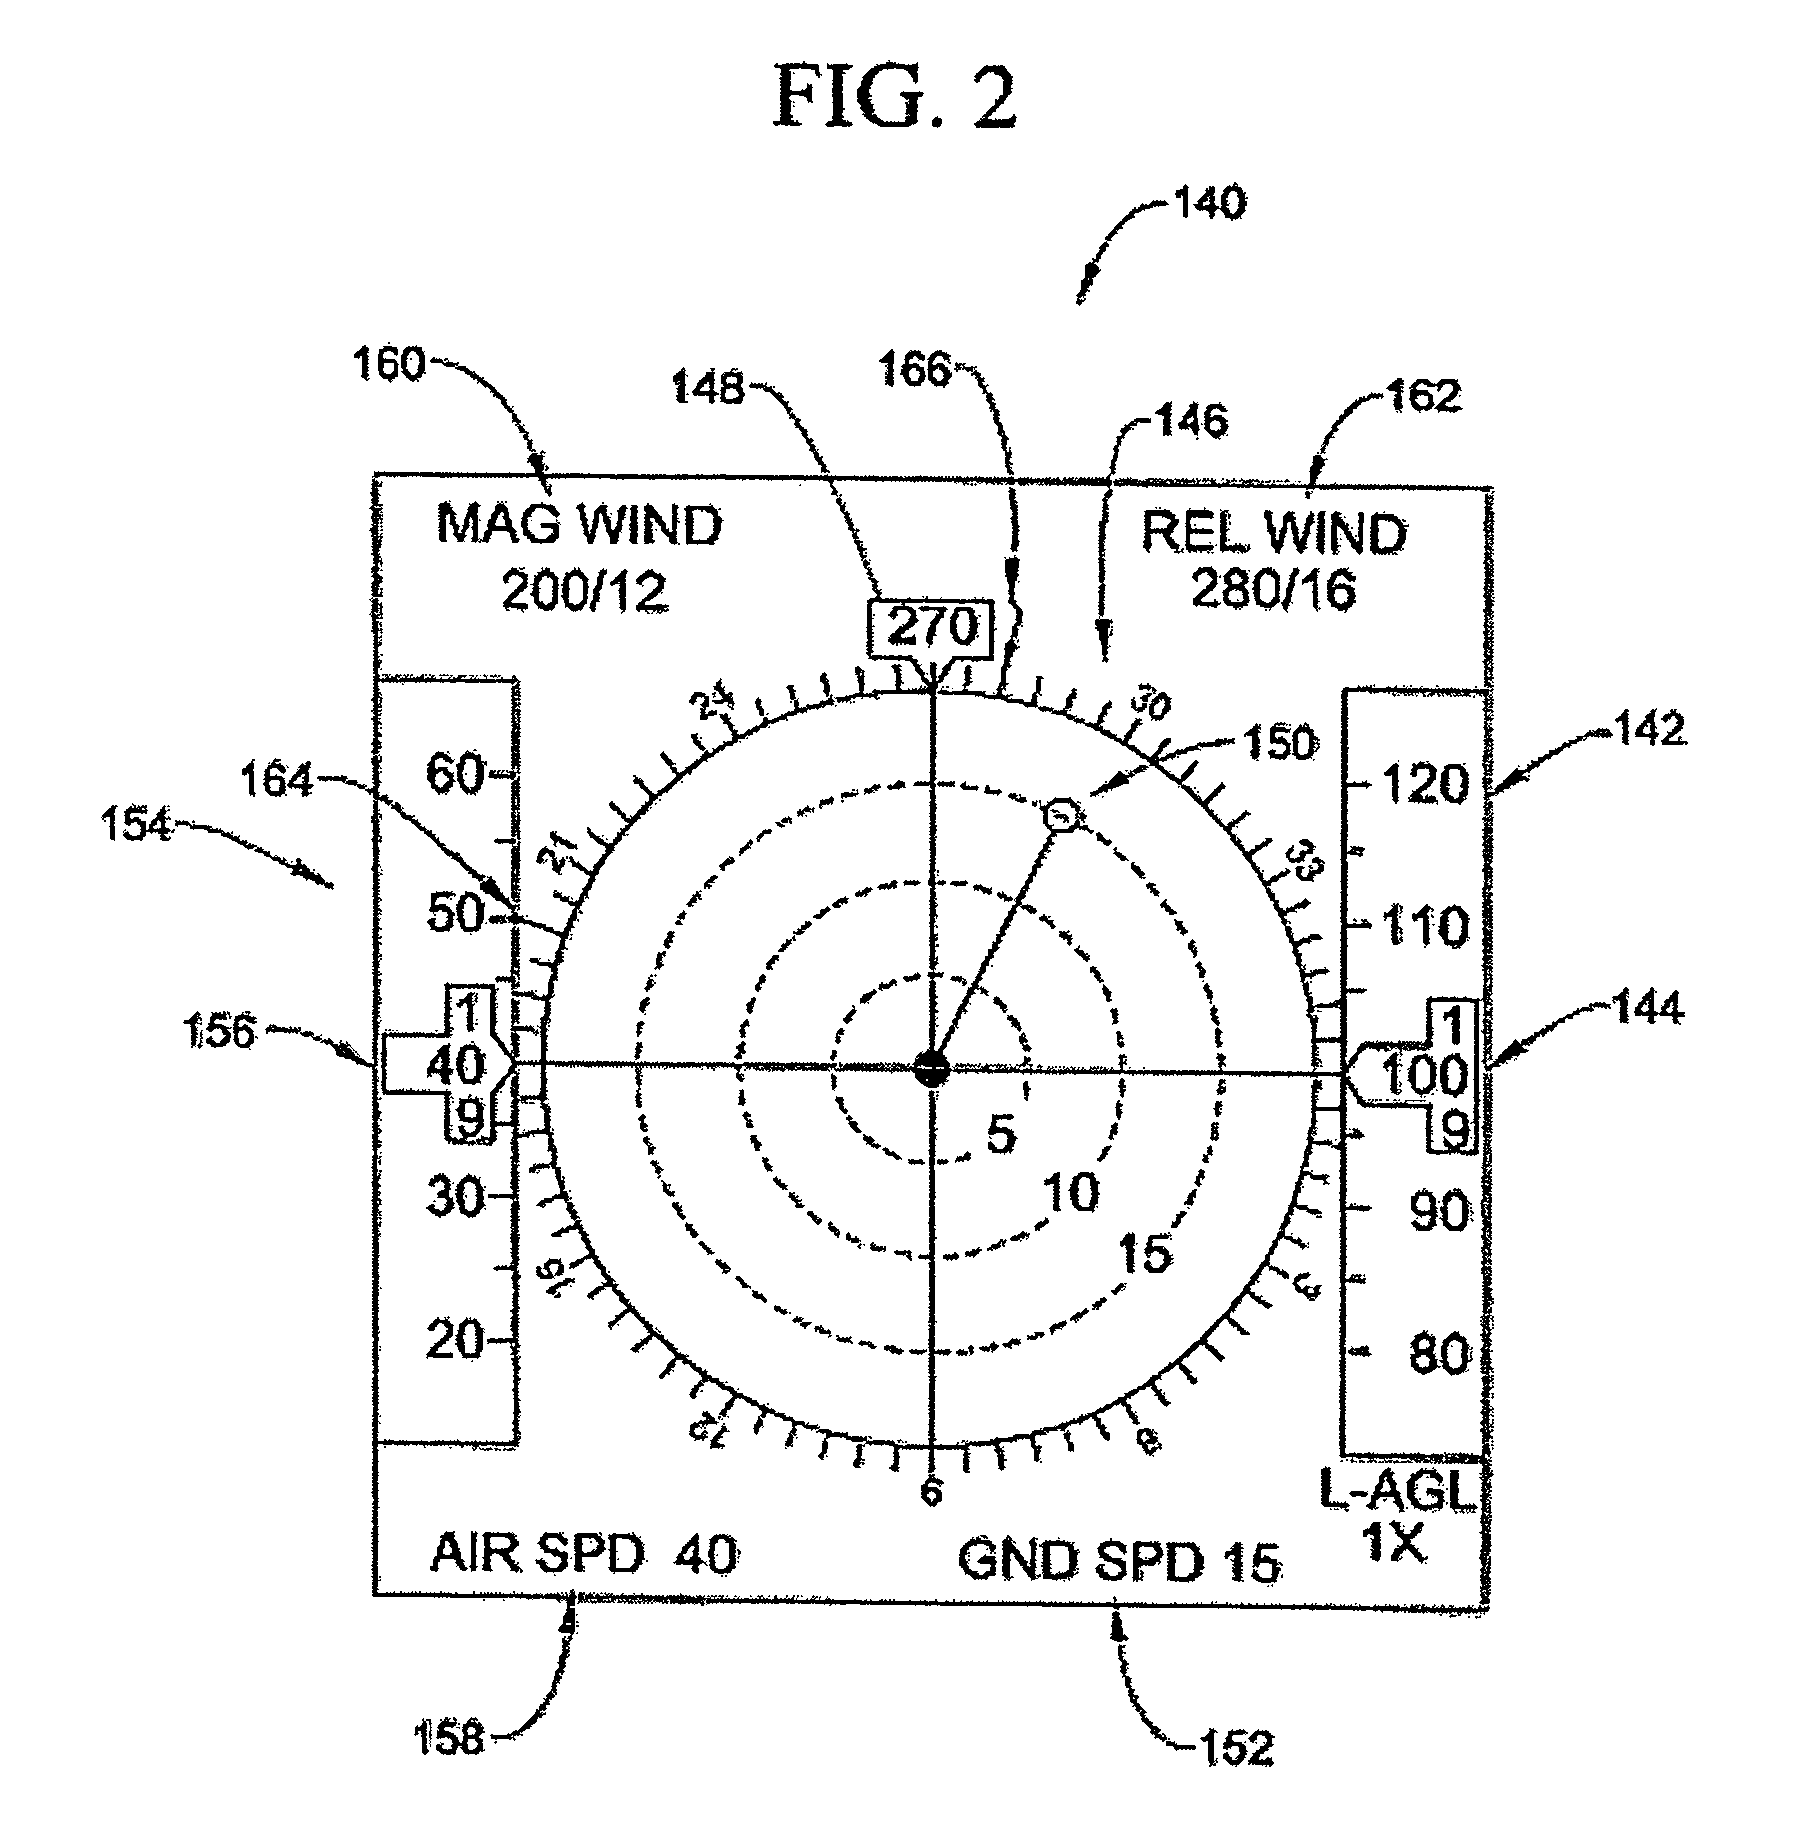 Optical system for detecting and displaying aircraft position and environment during landing and takeoff